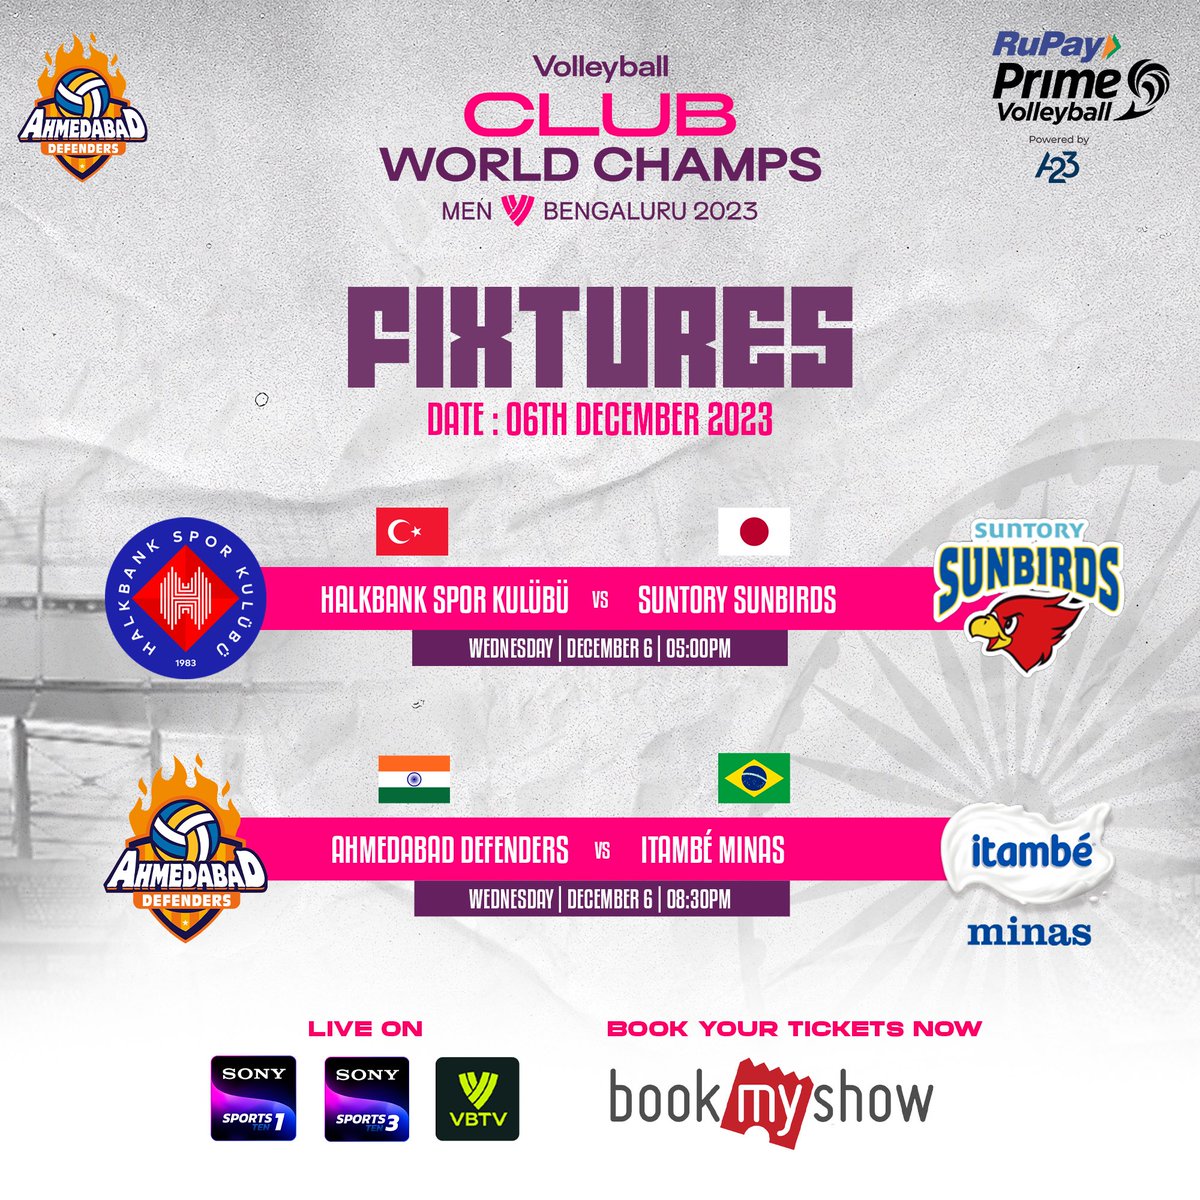 Here comes the very big day & historic day for #IndianVolleyball
There are two matches today 1st between Turkey & Japanese champions  & 2nd between @Amd_Defenders and Brazil champions. On 8:30 PM..
Let's cheer our defenders .
#ClubVolleyballworldchamps 
#Damdaardefenders